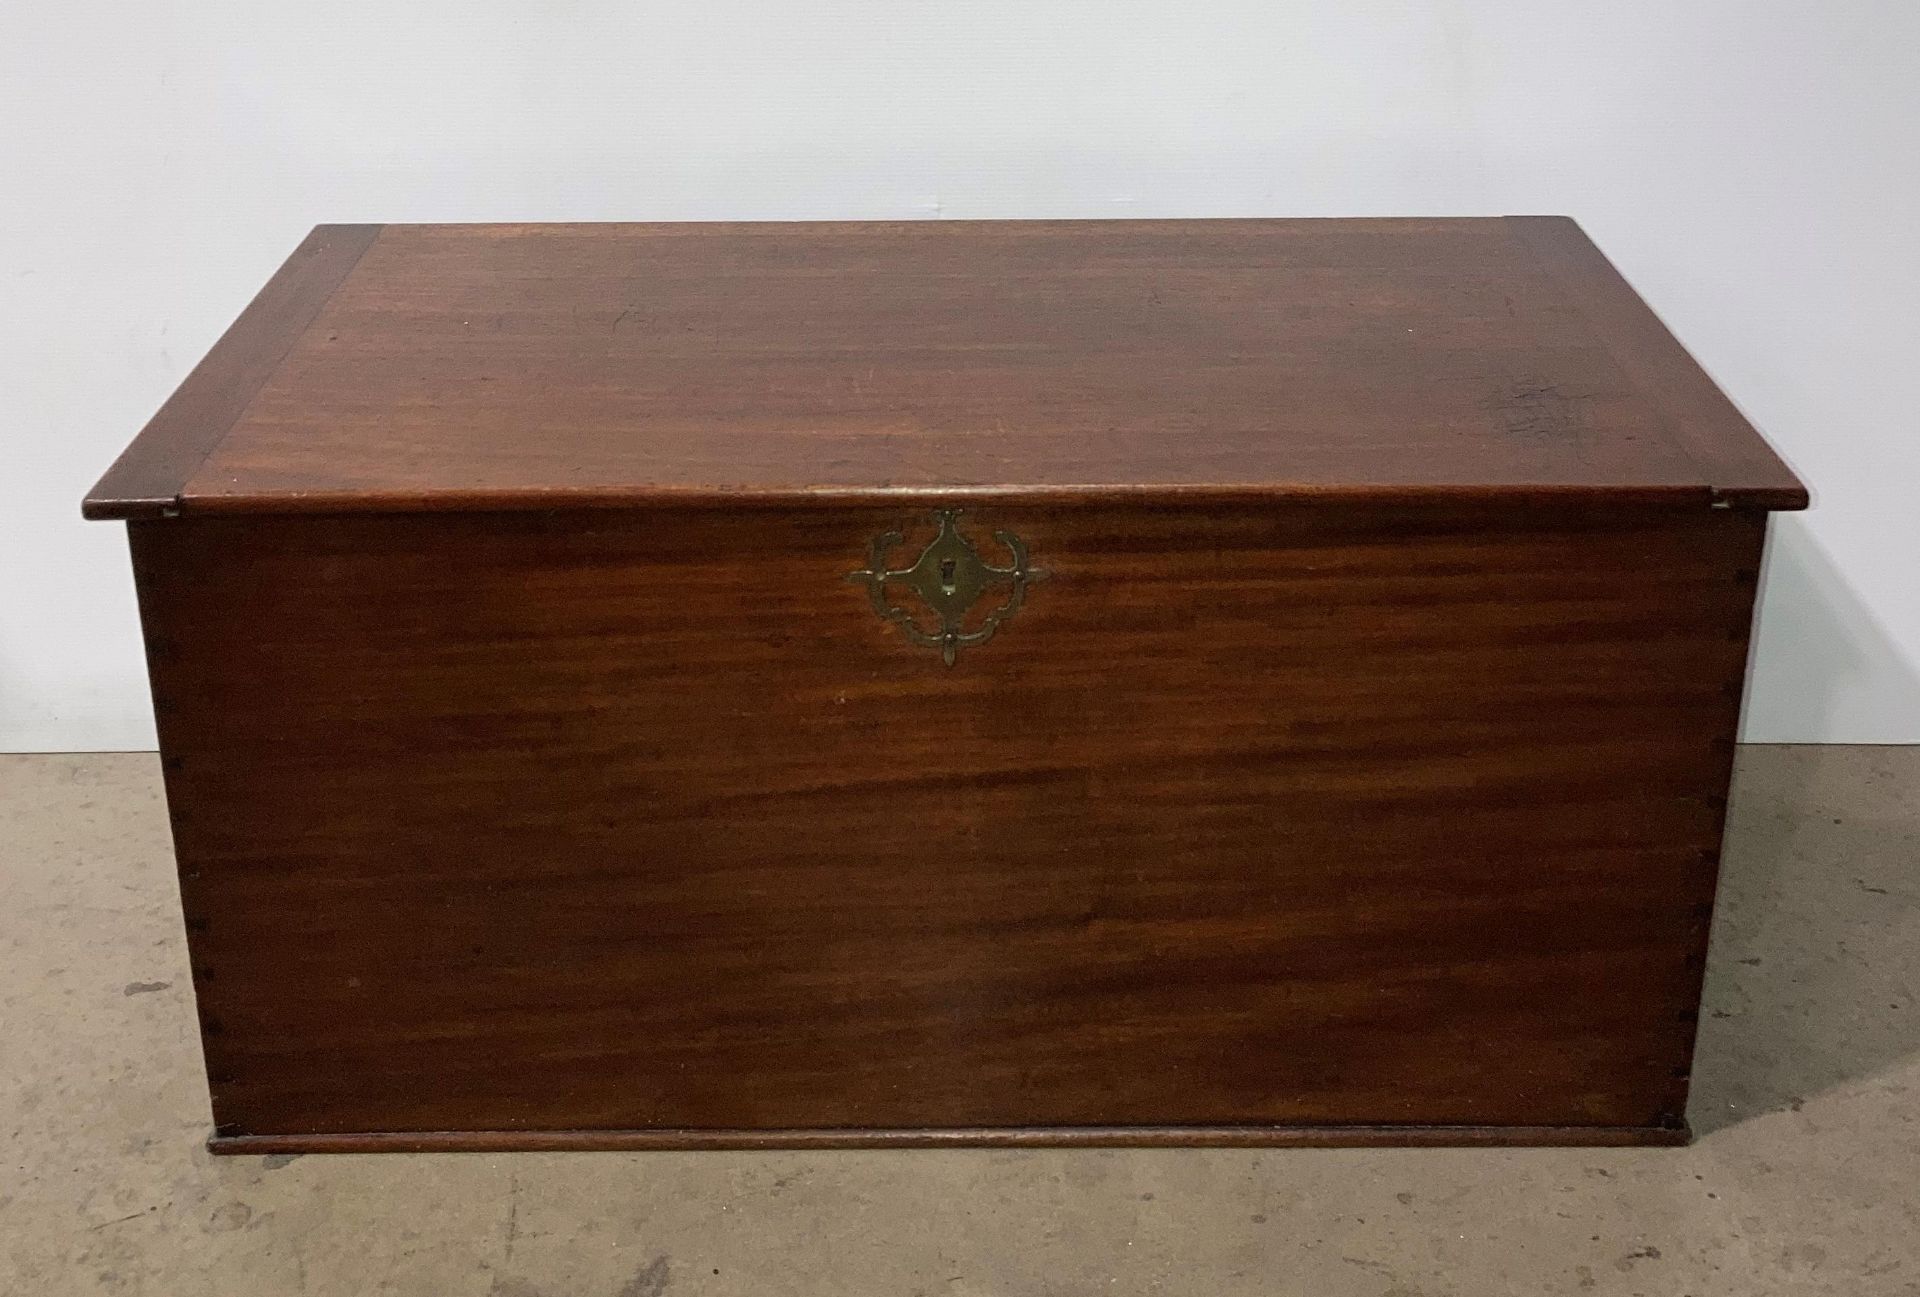 Mahogany lift-top storage chest with brass handles and brass key hole protector,